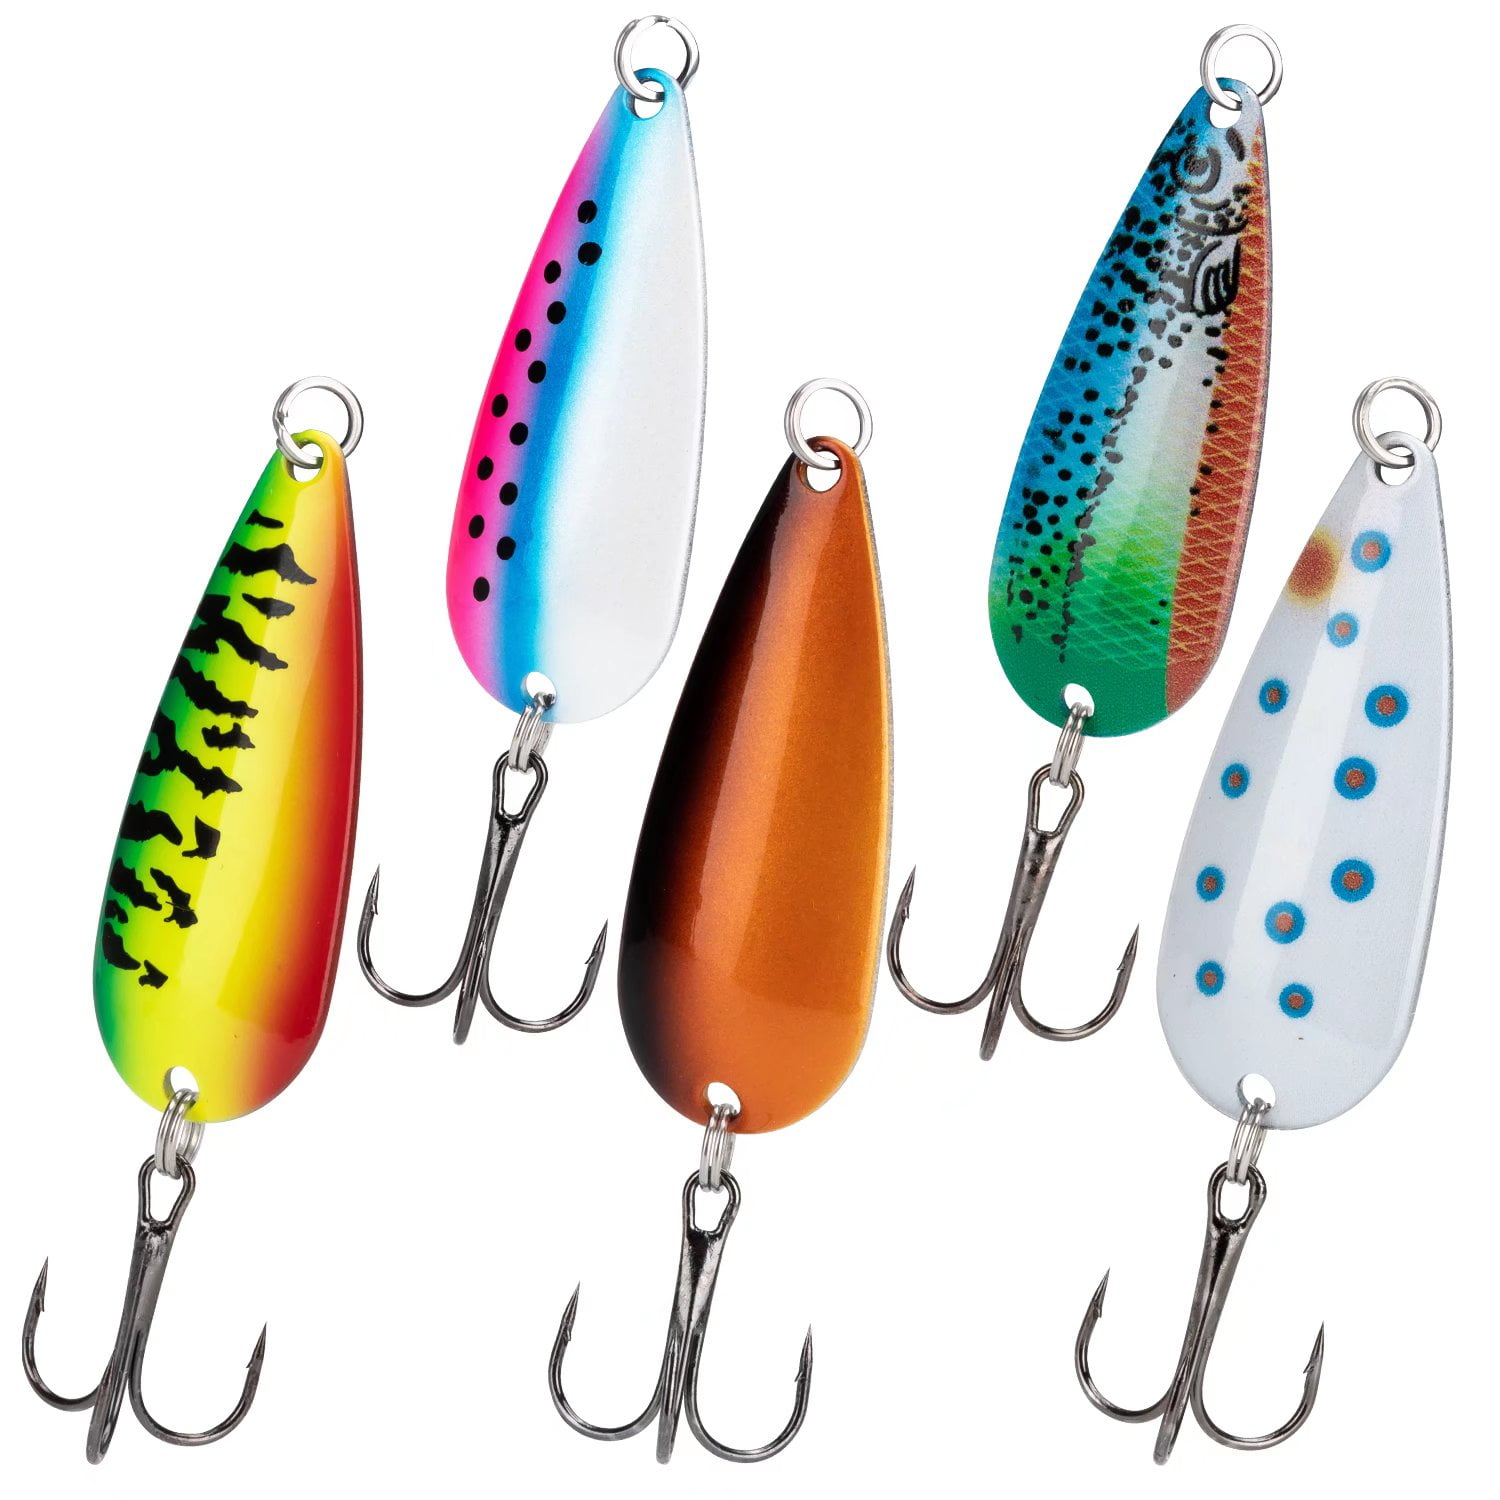 THKFISH Soft Swimbait Soft Plastic Fishing Lures Bass Lures Swim Baits  Lures for Bass Fishing Worms Fishing Bait for Bass Trout Walleye Color 5-S#